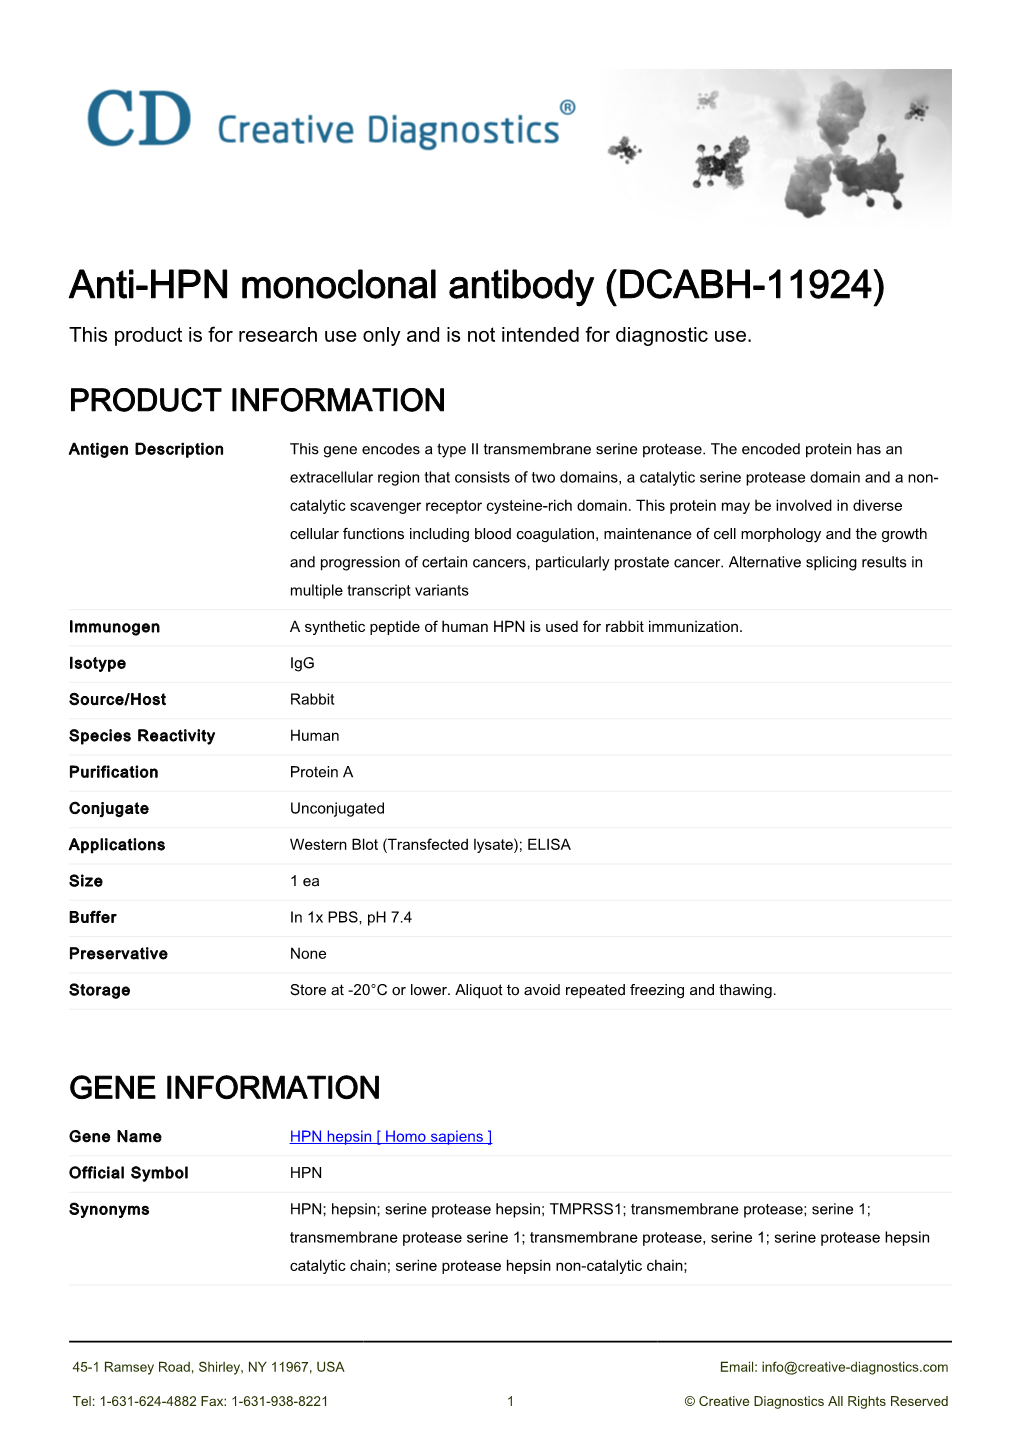 Anti-HPN Monoclonal Antibody (DCABH-11924) This Product Is for Research Use Only and Is Not Intended for Diagnostic Use